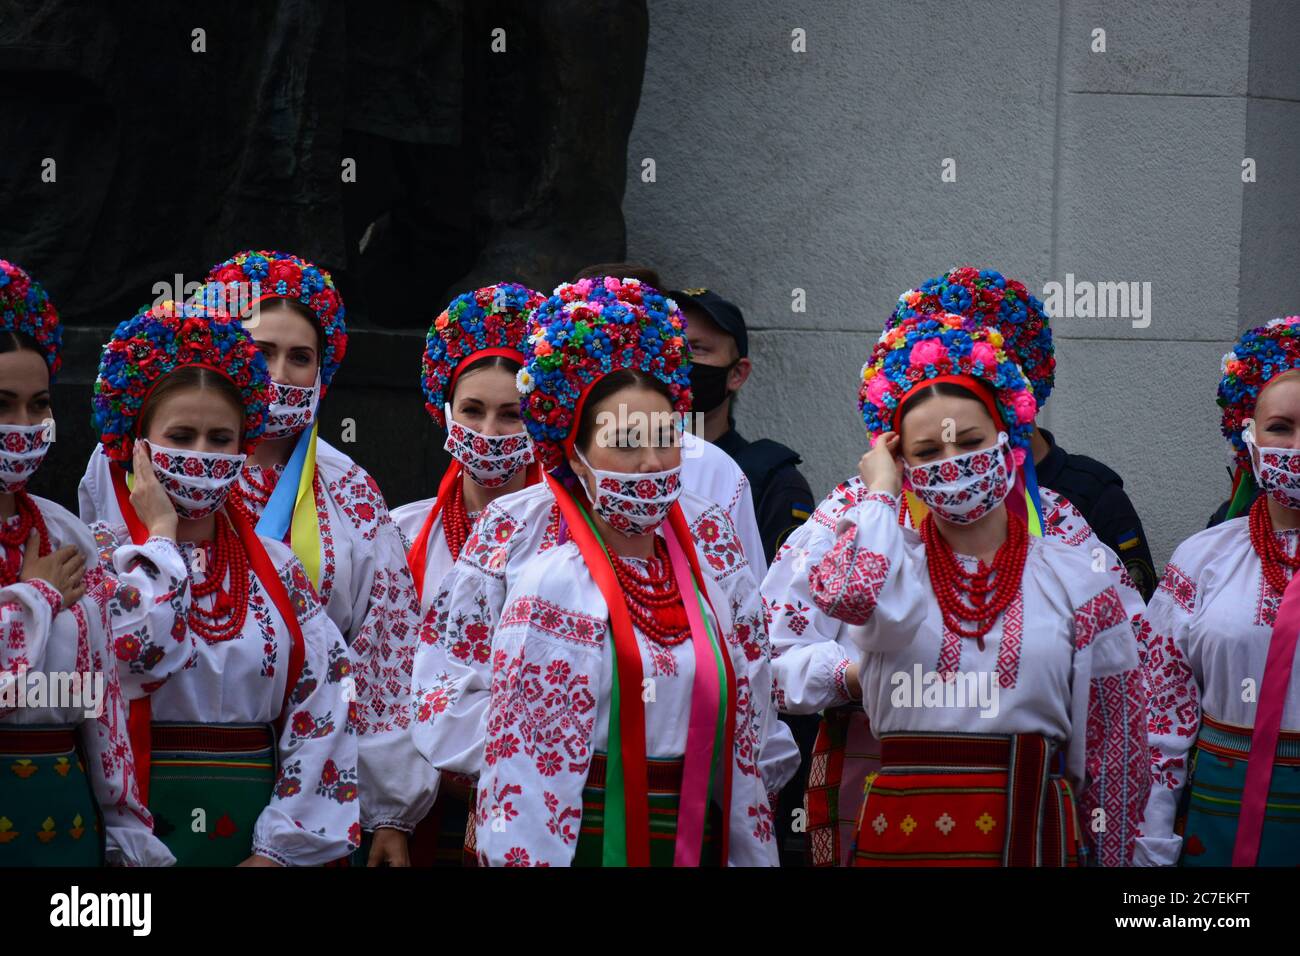 Coronavirus outbreak: Government prolongs adaptive quarantine until July 31 in Ukraine. Members of the Ukrainian choir in national costumes and embroi Stock Photo